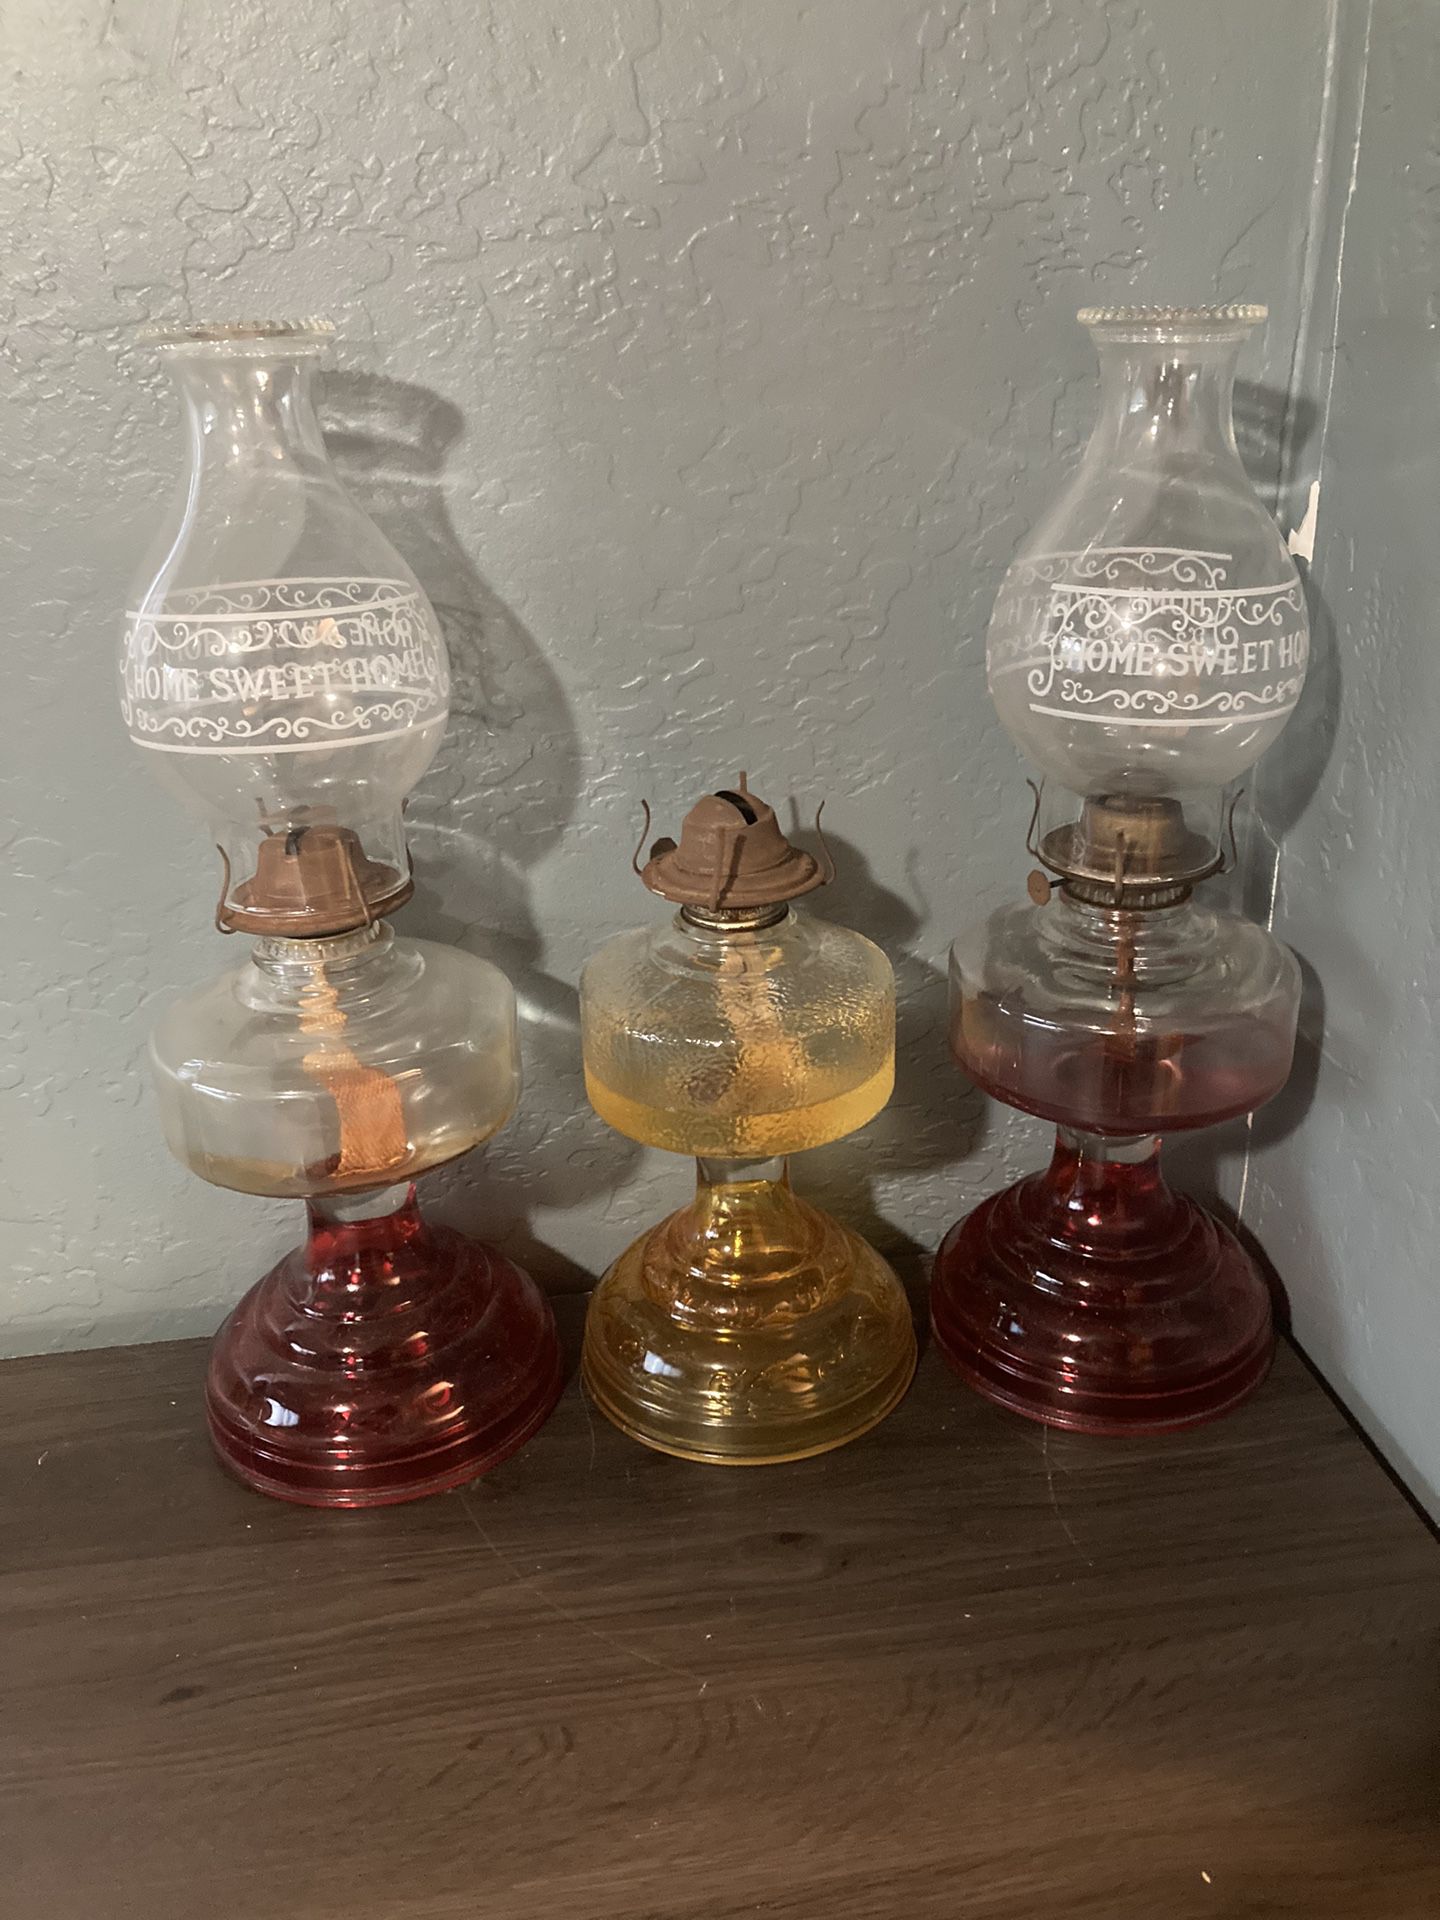 VINTAGE GLASS “EAGLE OIL LAMPS”. “HOME SWEET HOME”. NICE CONDITION.